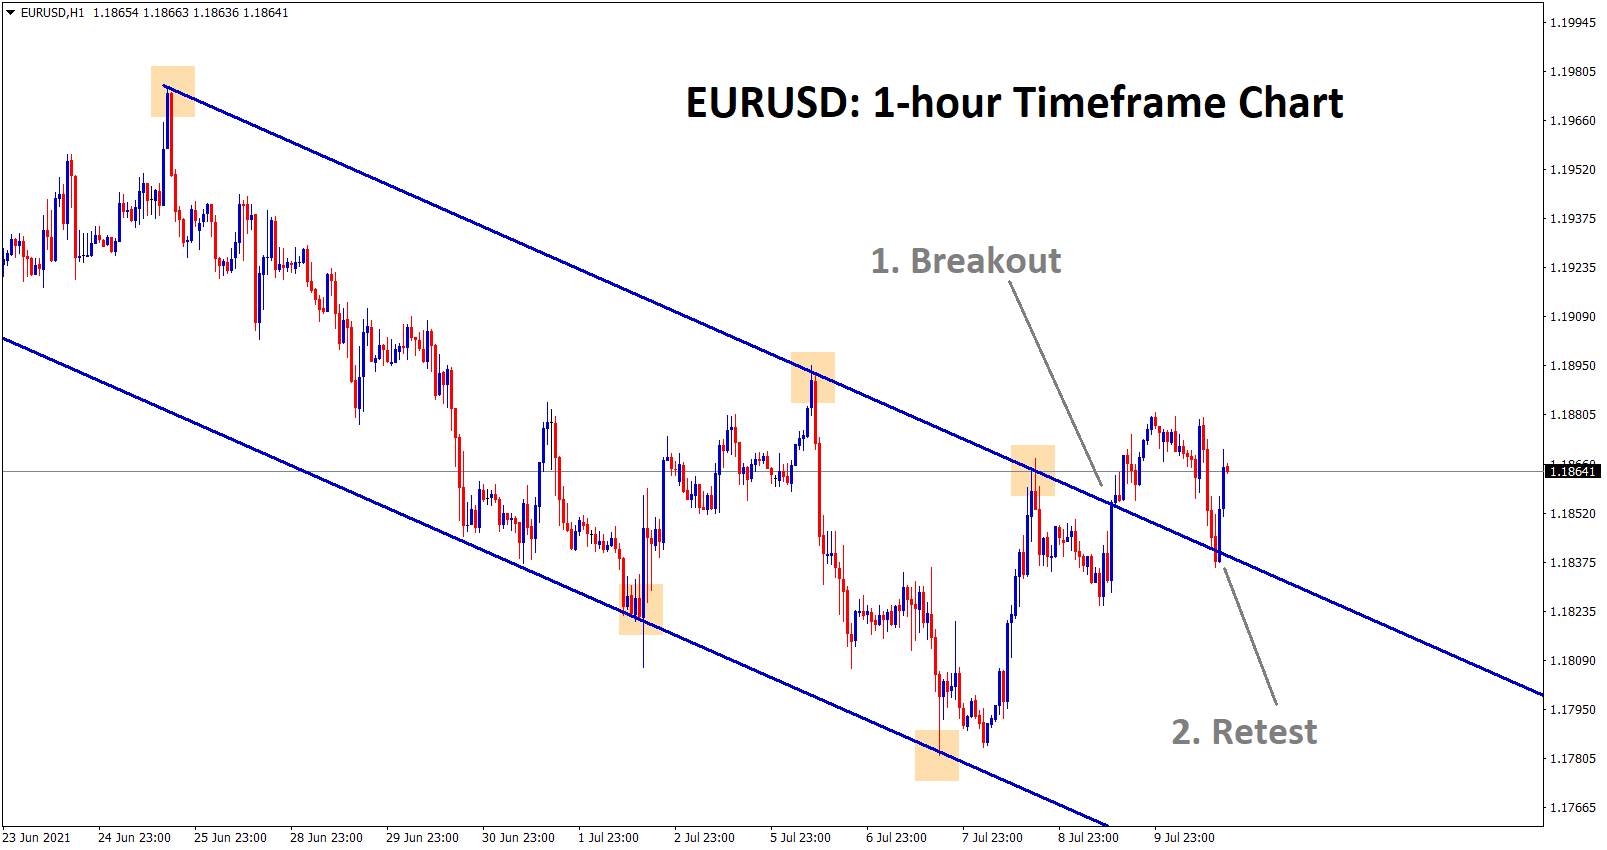 Breakout and retest of the descending channel happened in the EURUSD 1hr chart